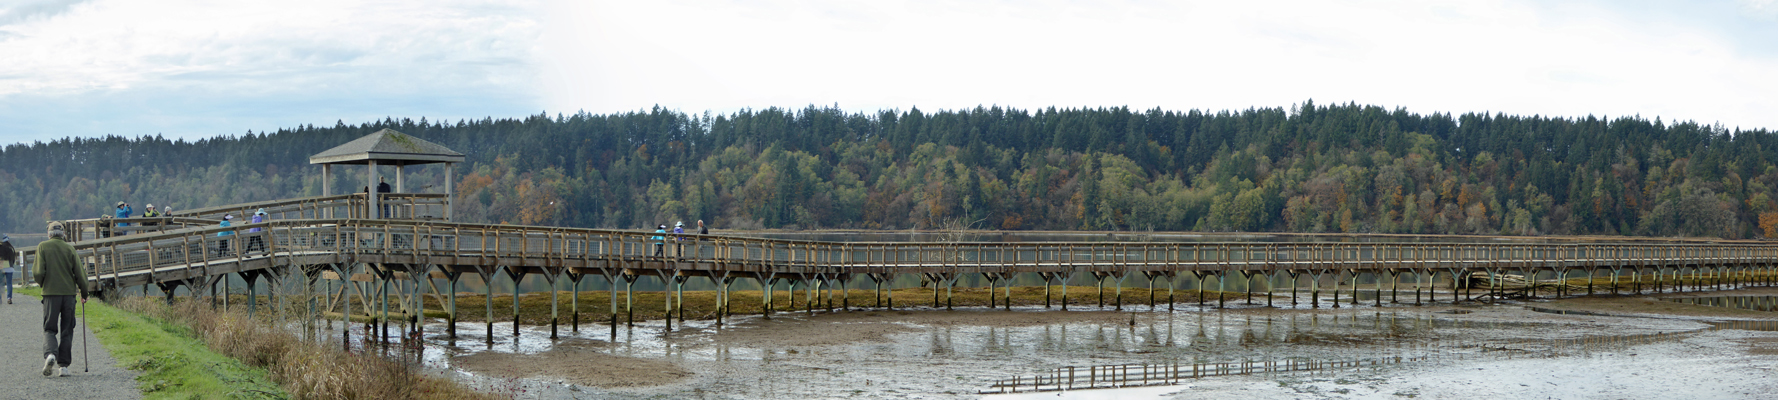 Observation tower boardwalk Nisqually